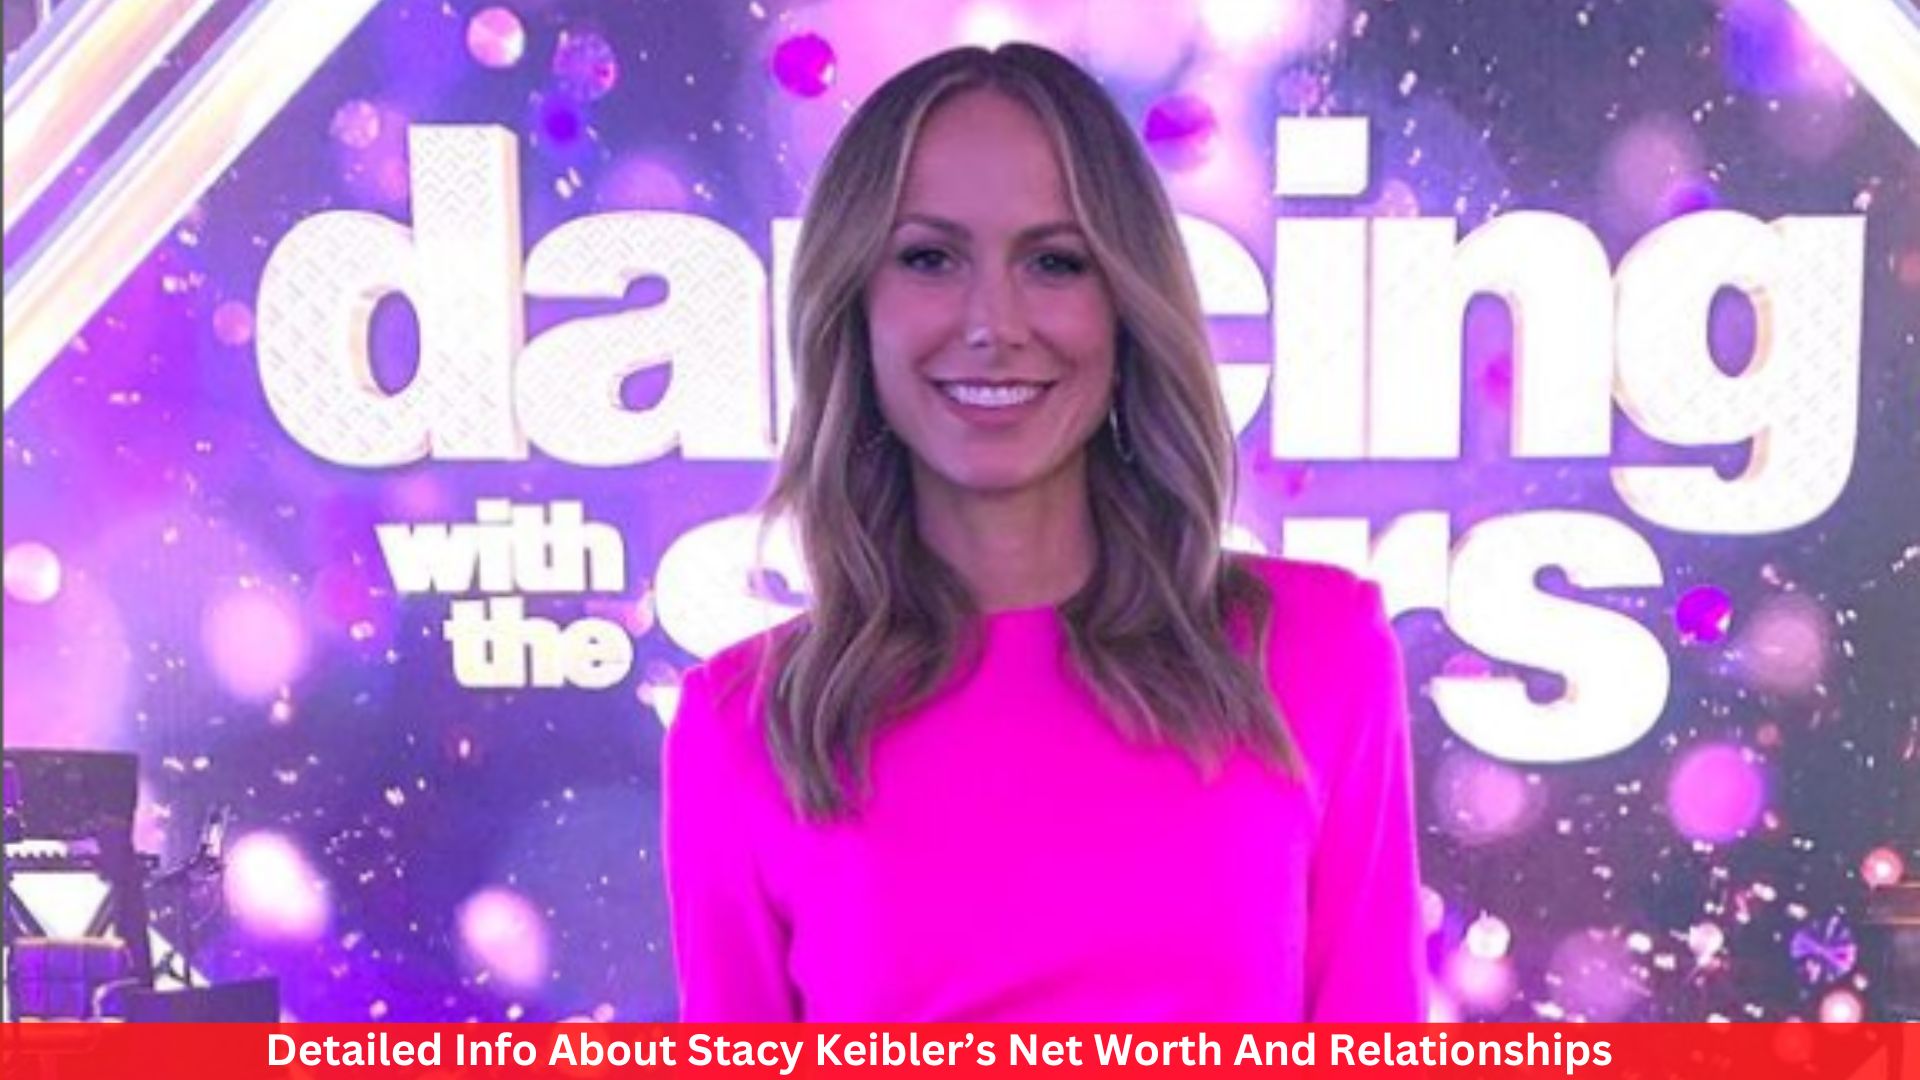 Detailed Info About Stacy Keibler’s Net Worth And Relationships